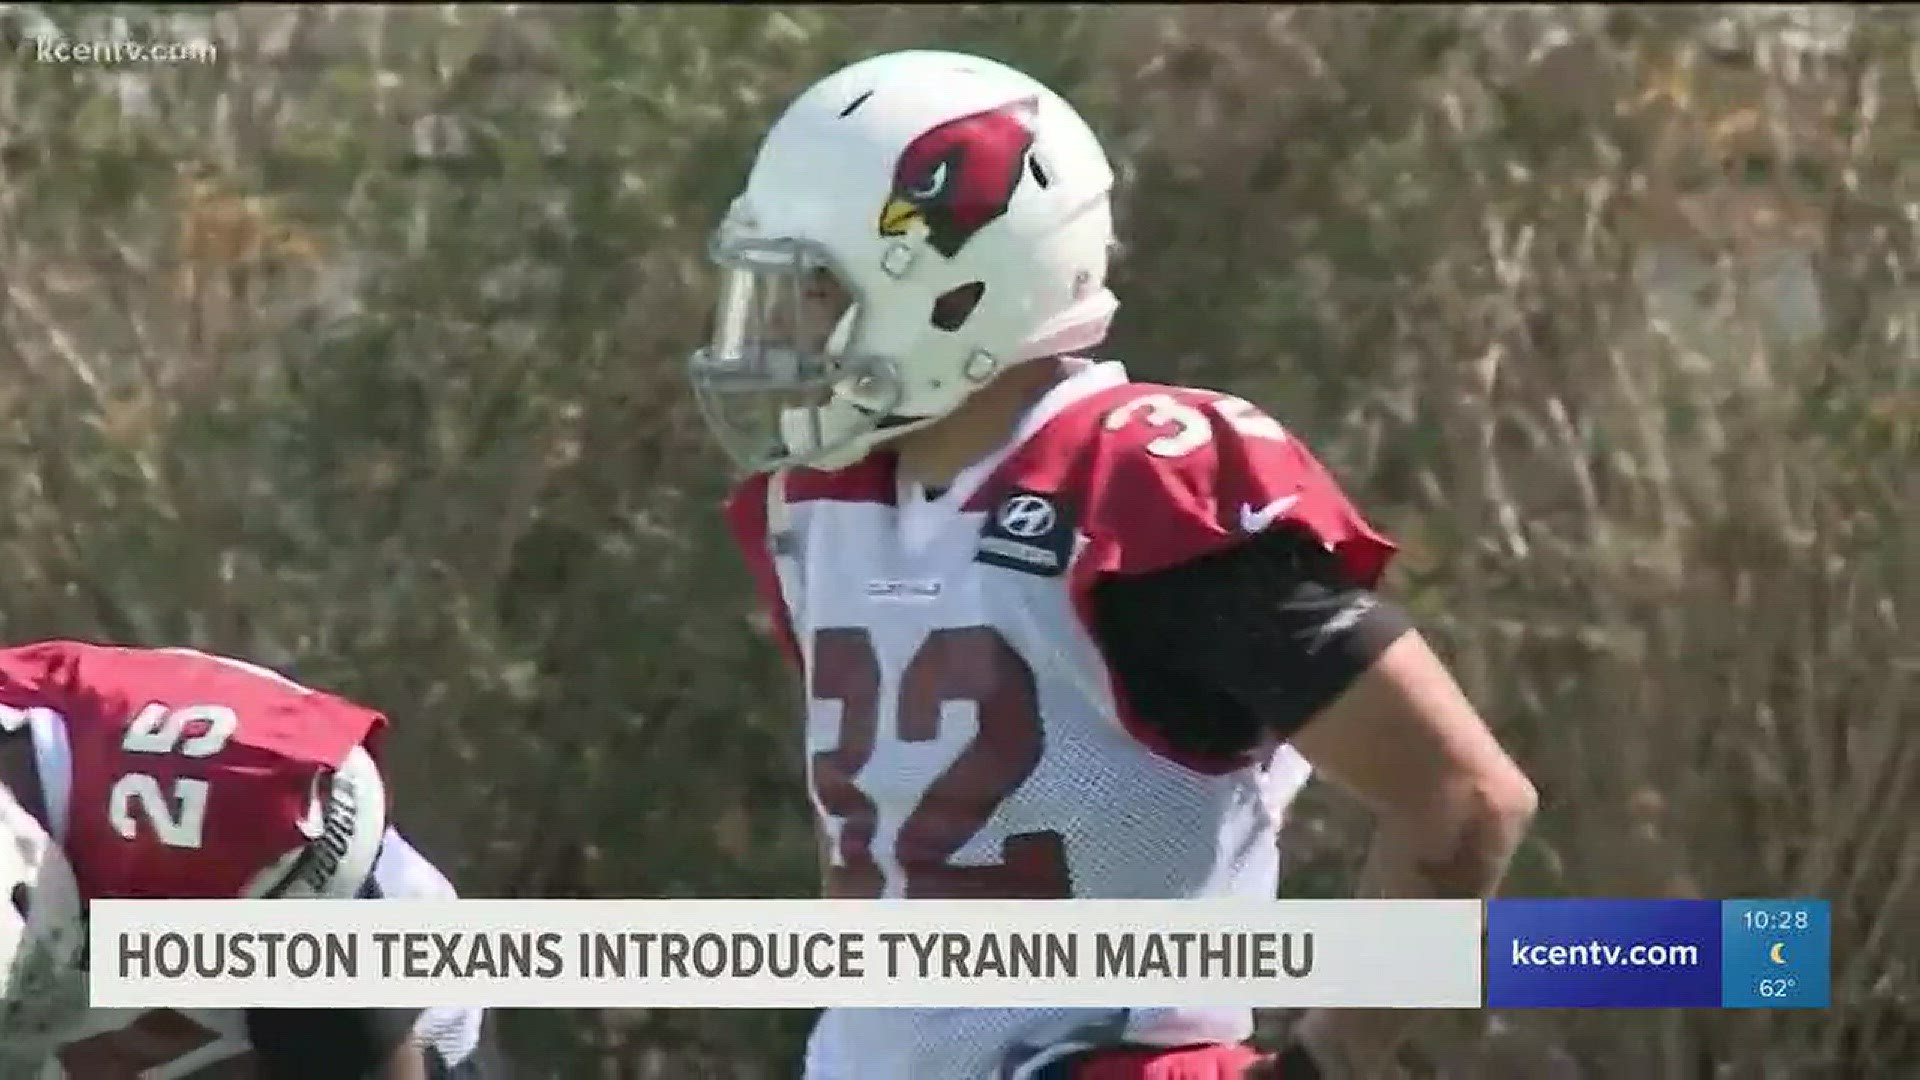 The Houston Texans introduced their newest safety, Tyrann Mathieu who signed a one-year deal with the team.